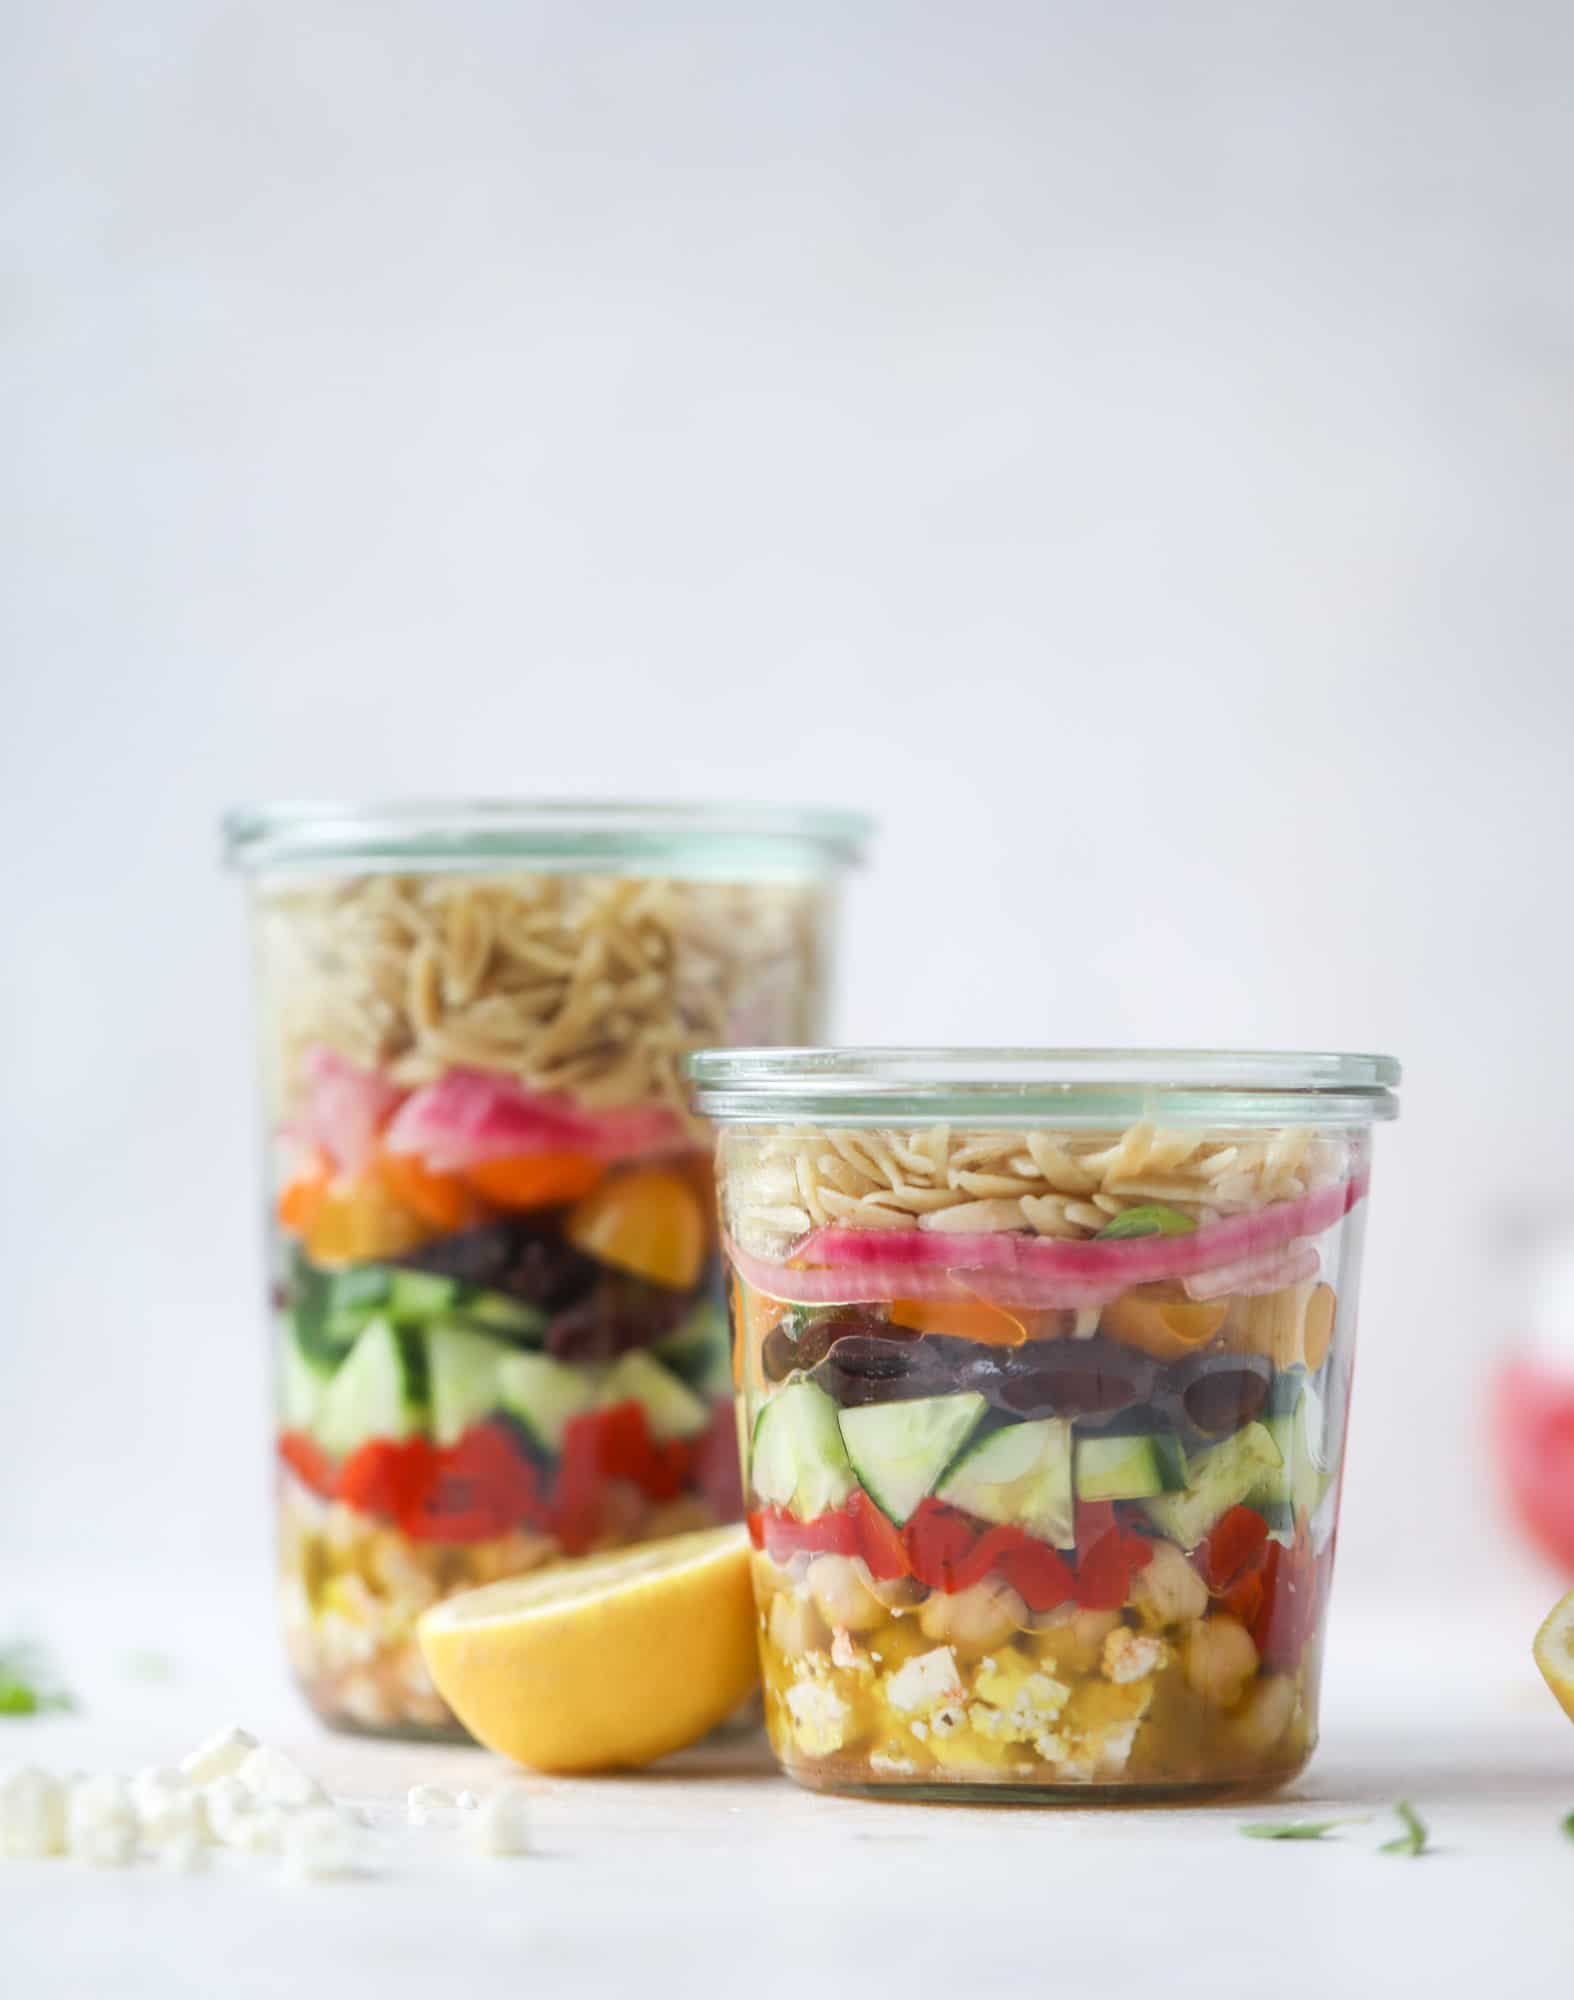 These are my top 45 favorite lunch ideas that make eating at work so much more delicious! These easy, mostly make-ahead and healthy lunch ideas are perfect to prep and plan for your week and a great way to stay on track for the new year. I howsweeteats.com #lunch #ideas